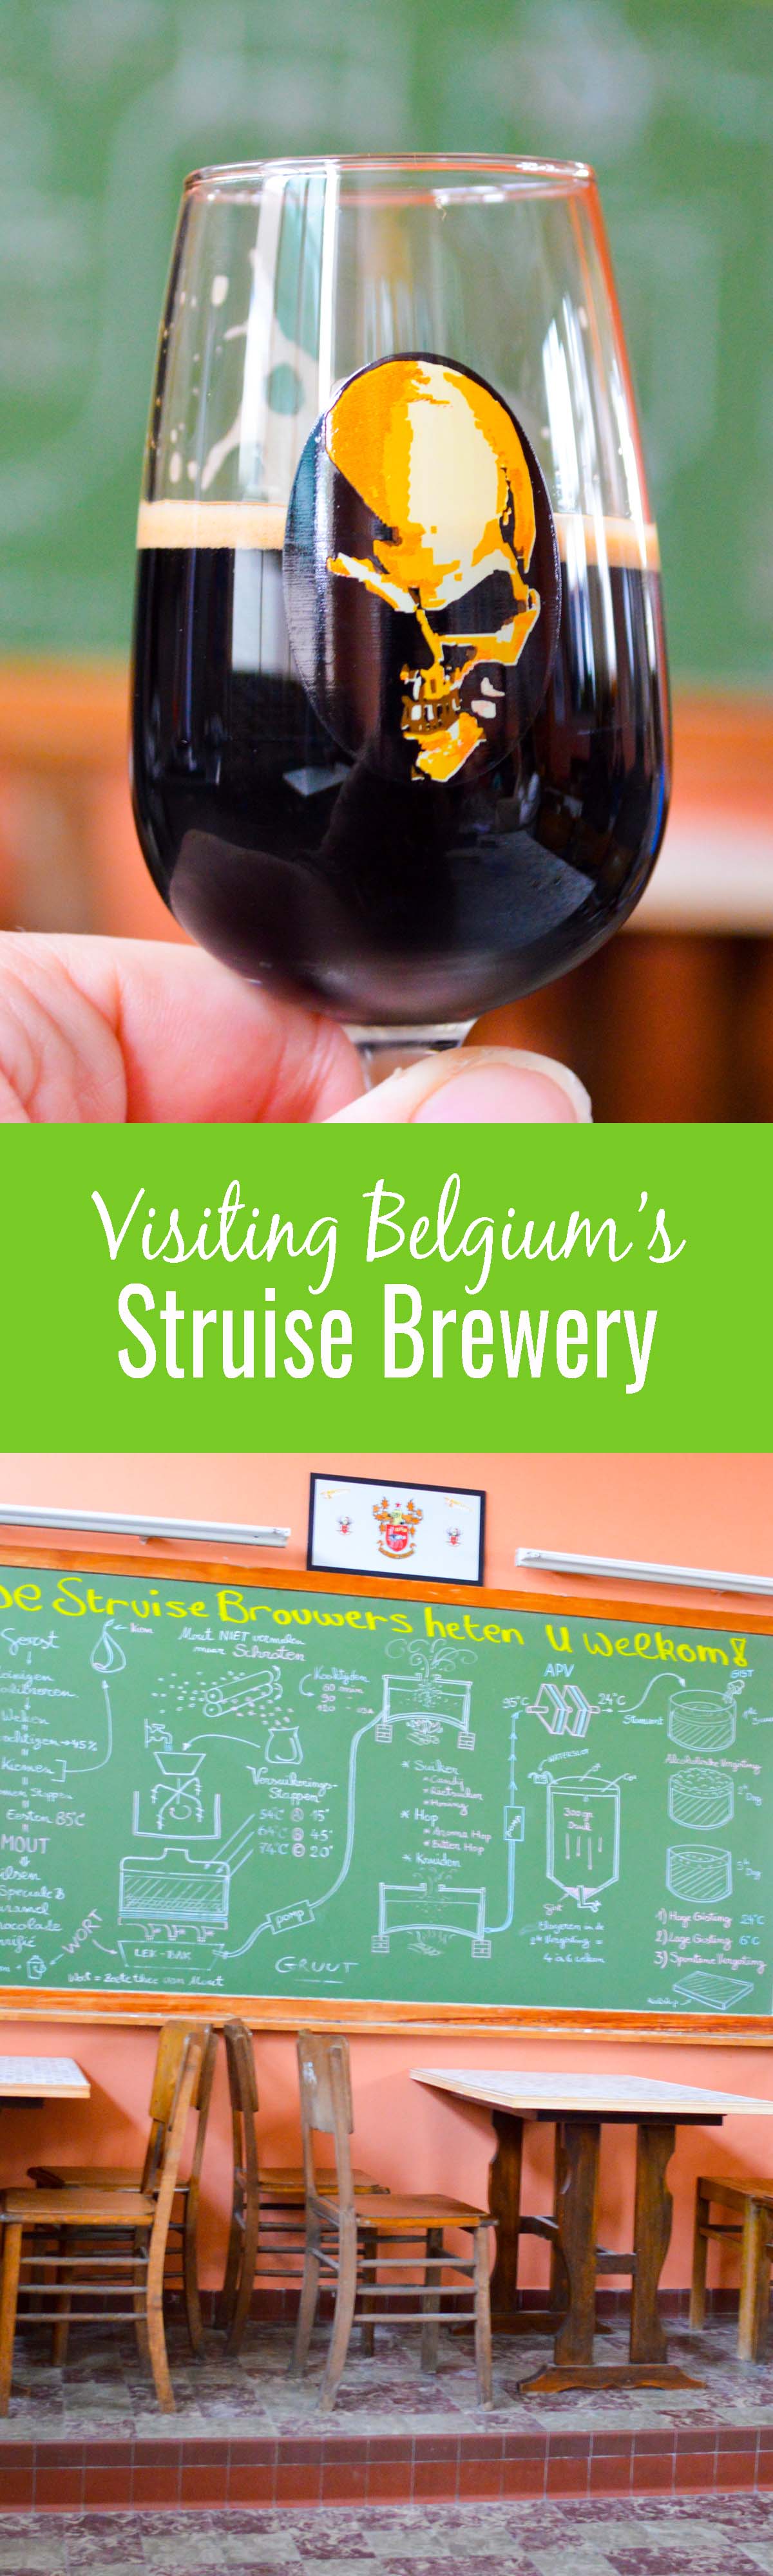 De Struise Brouwers in Oostvleteren, Belgium is a must visit brewery for anyone making a beer pilgrimage to Belgium. Be sure to try the Black Damnation. Talk about WOW!